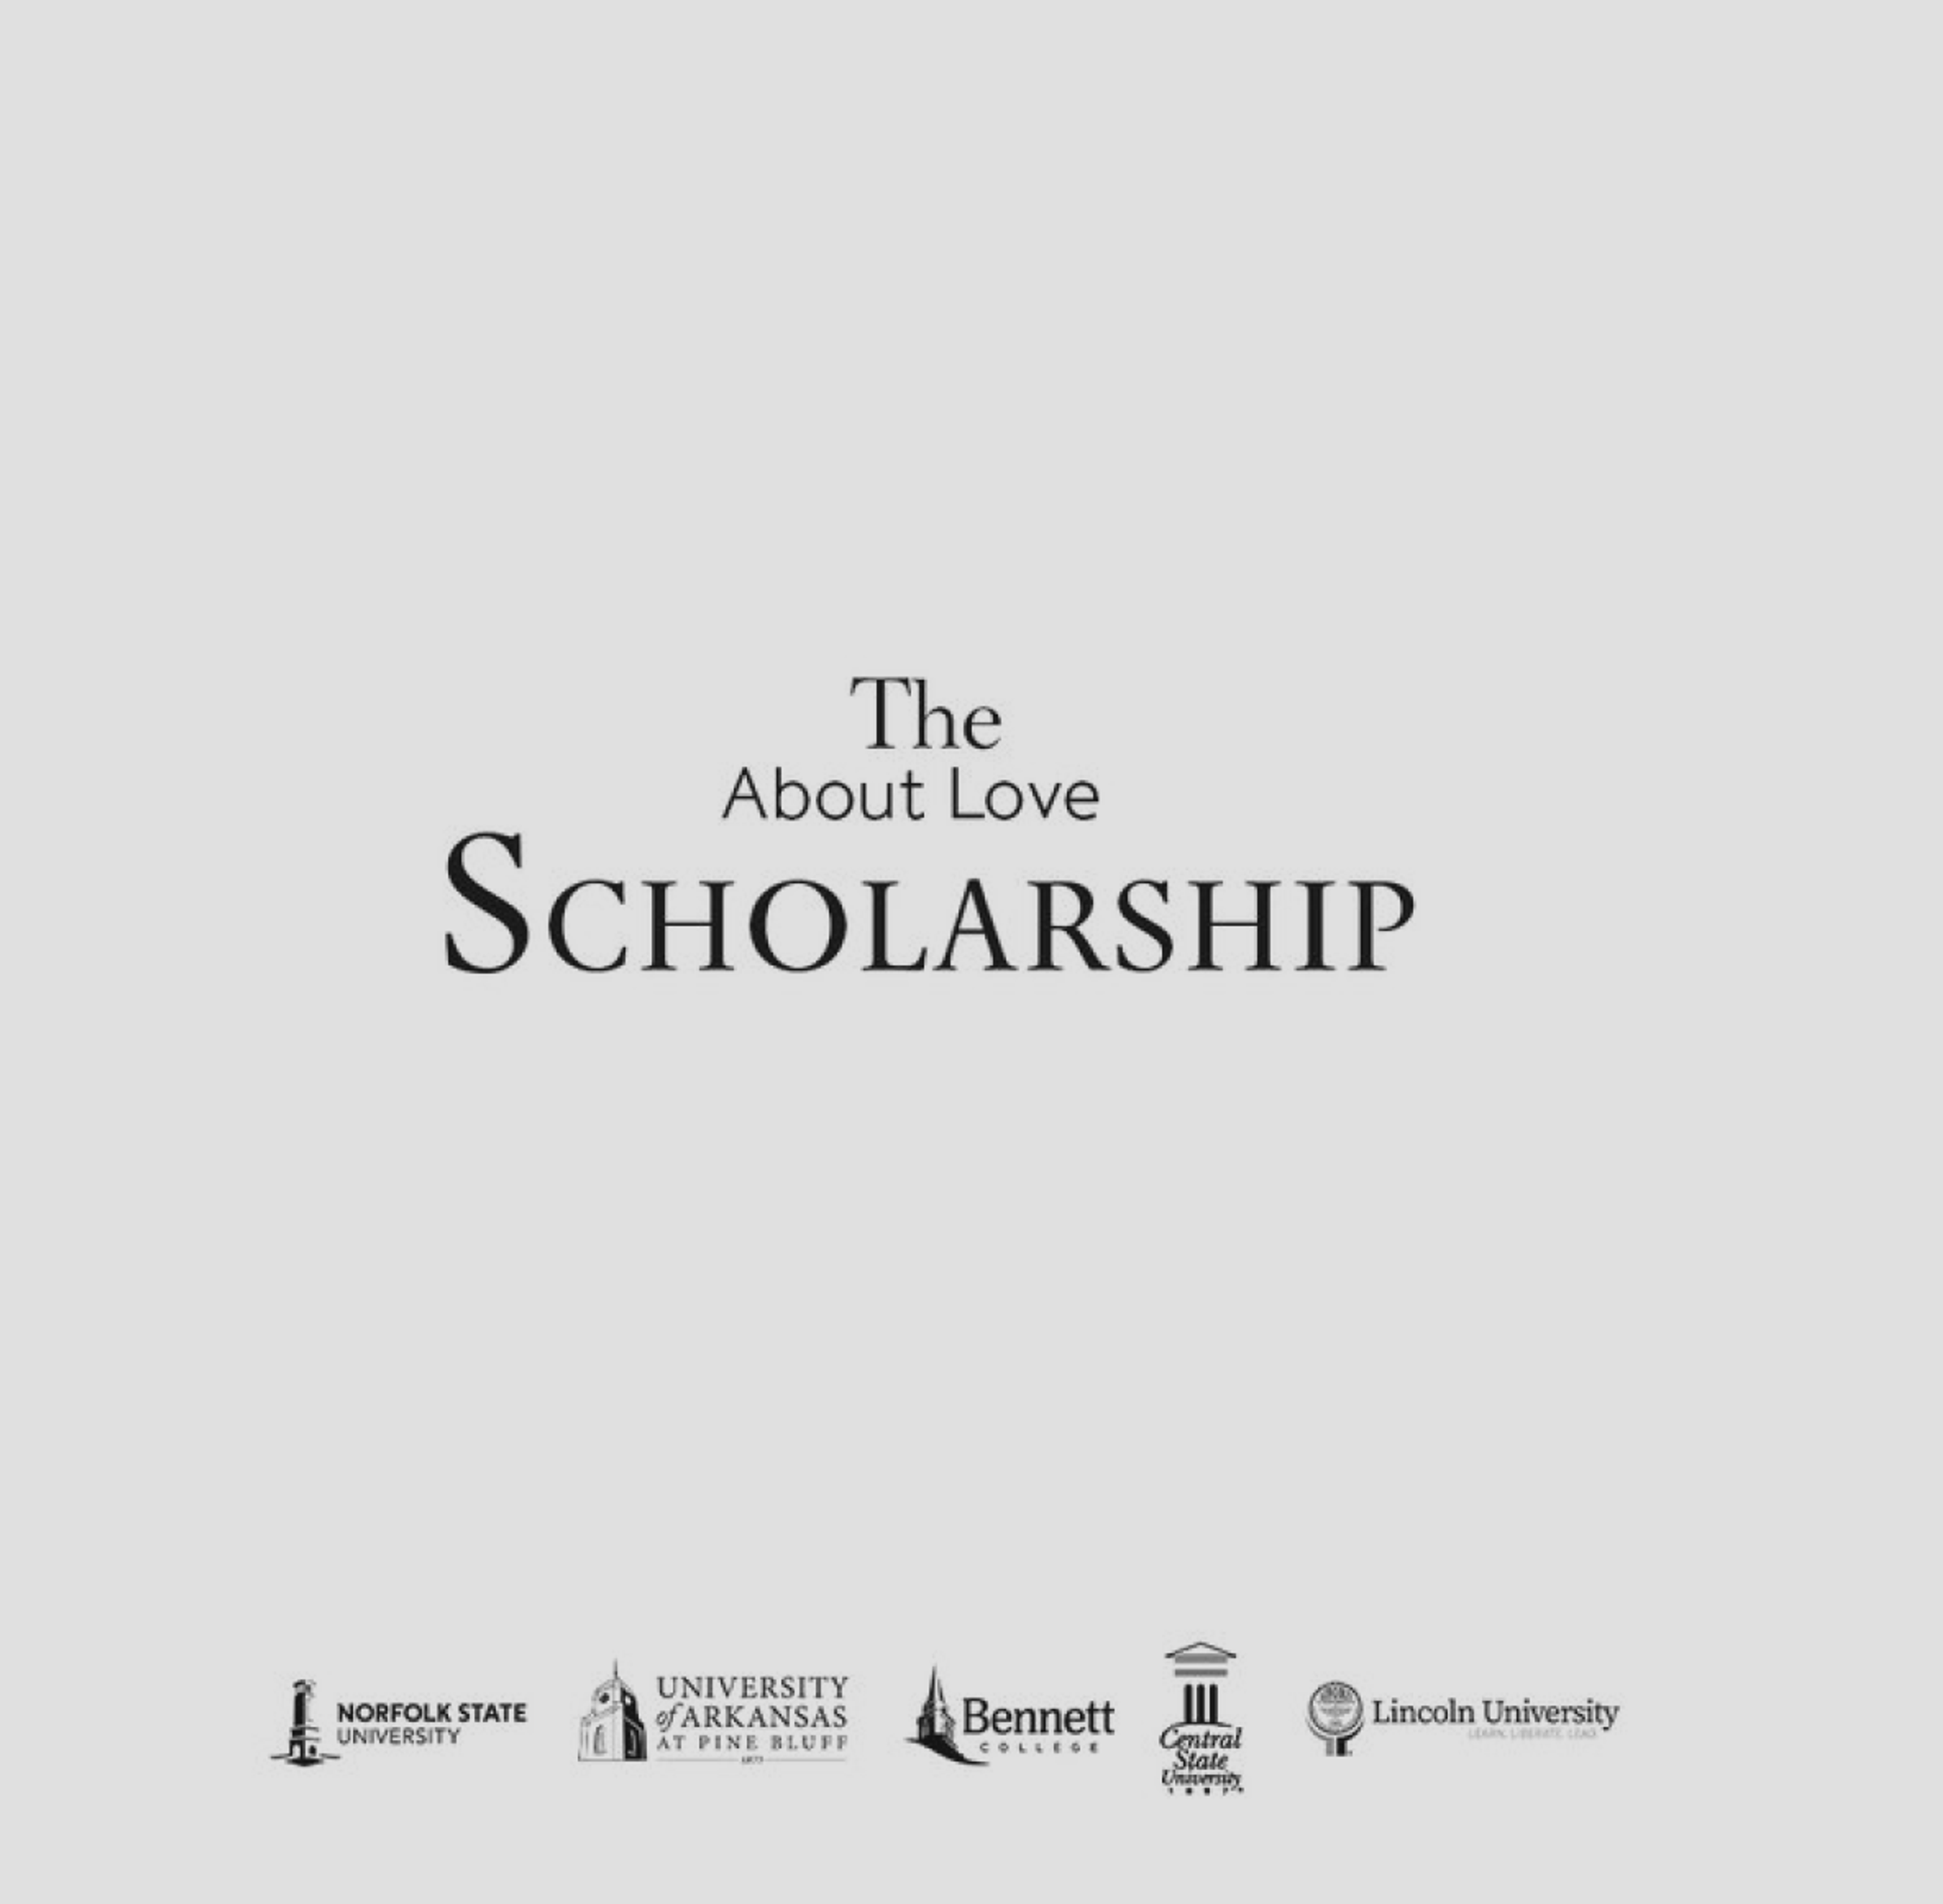 The About Love Scholarship